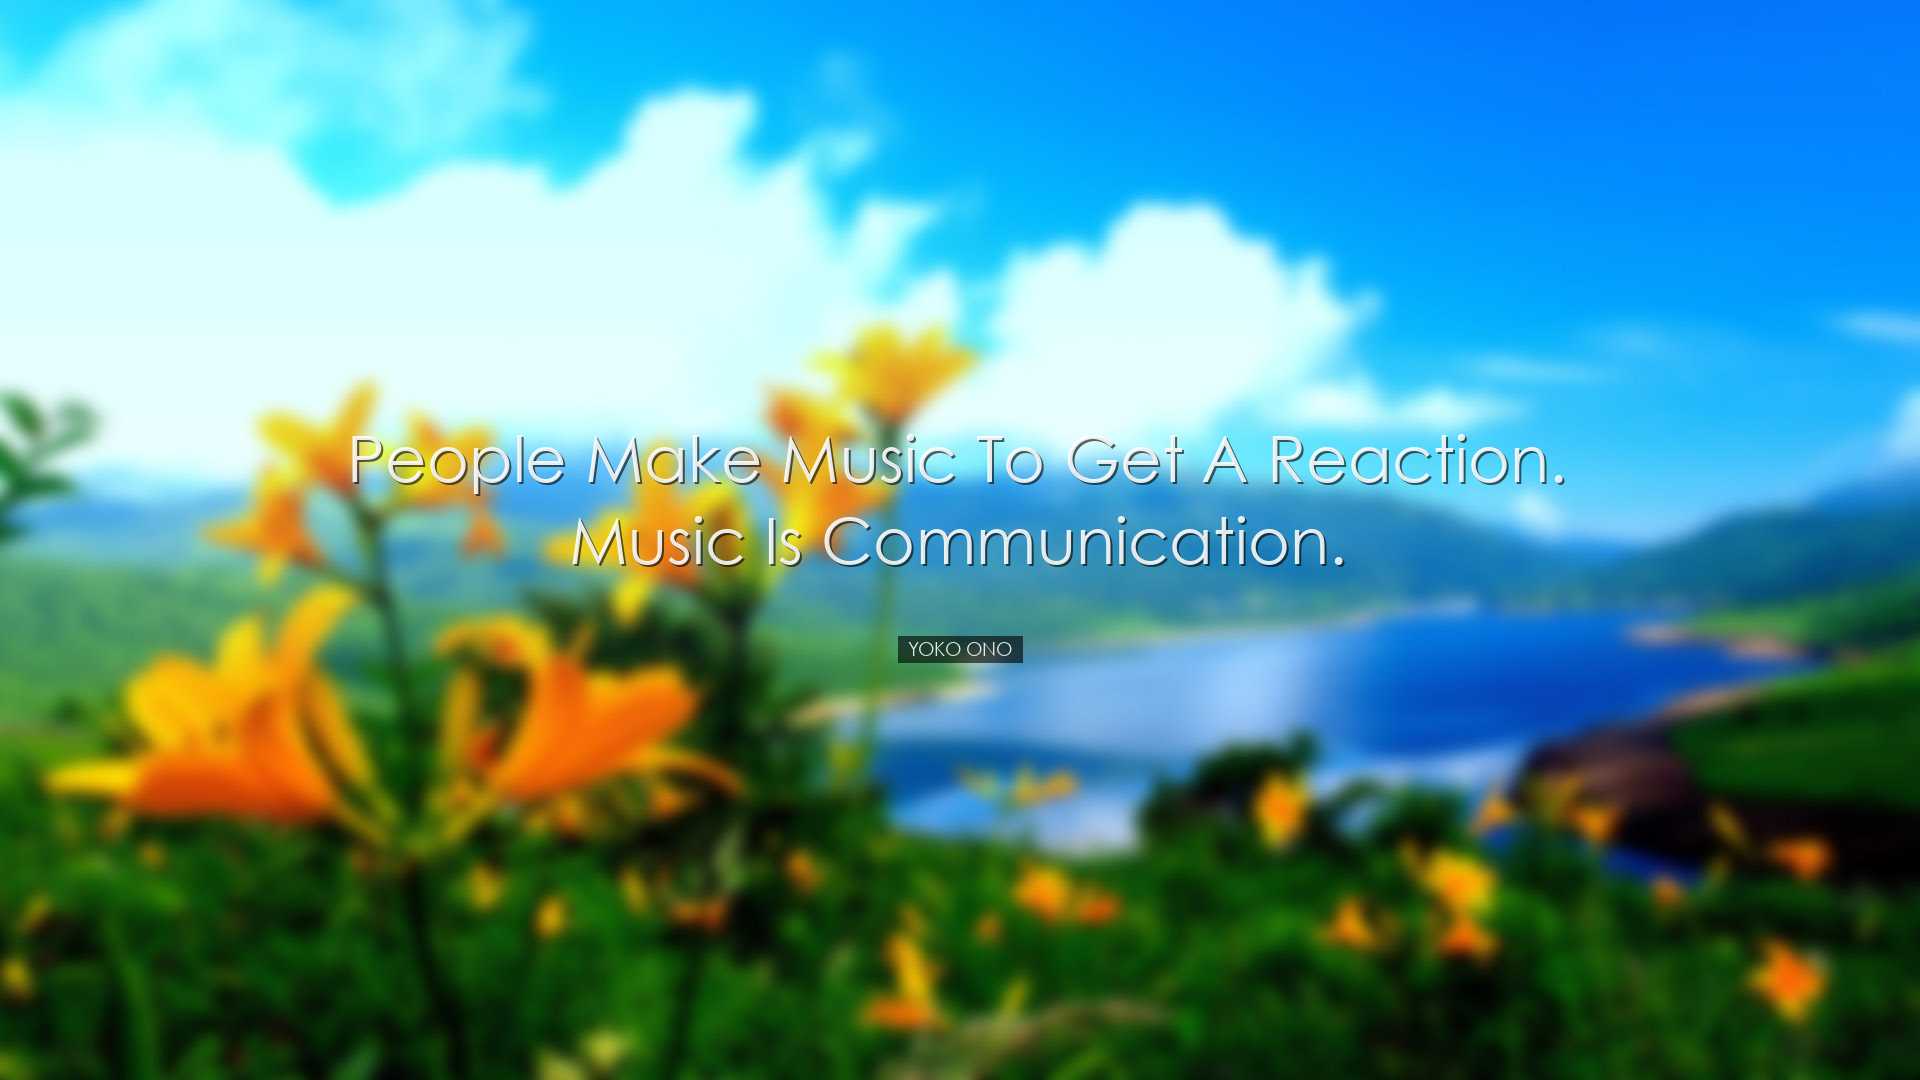 People make music to get a reaction. Music is communication. - Yok